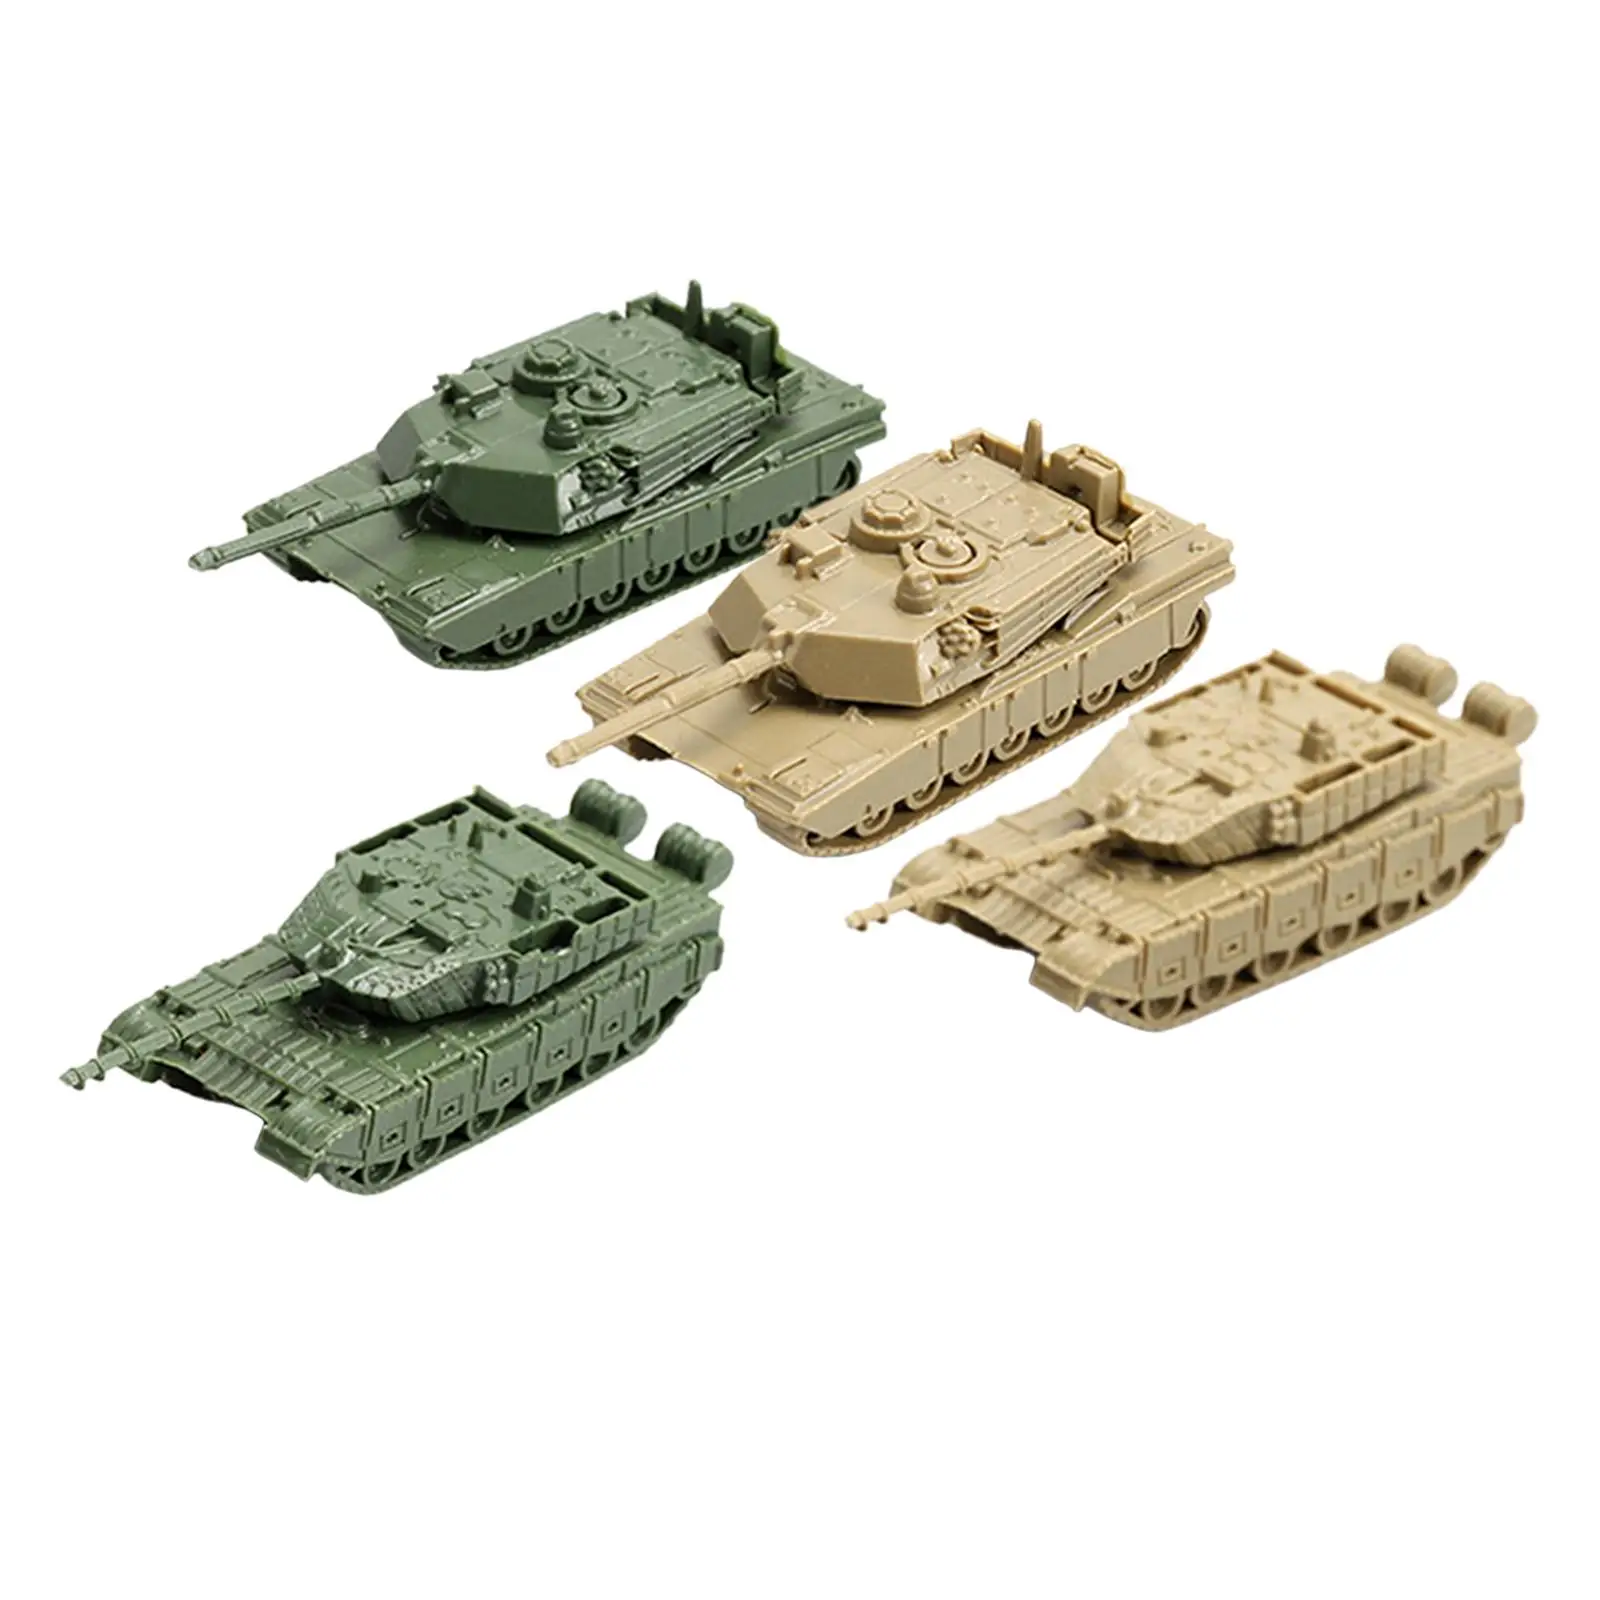 1:144 Tank Model Decorative Party Favors Toys Collection Gifts Display Durable 3D Puzzle for Boy and Girl Adult Kids